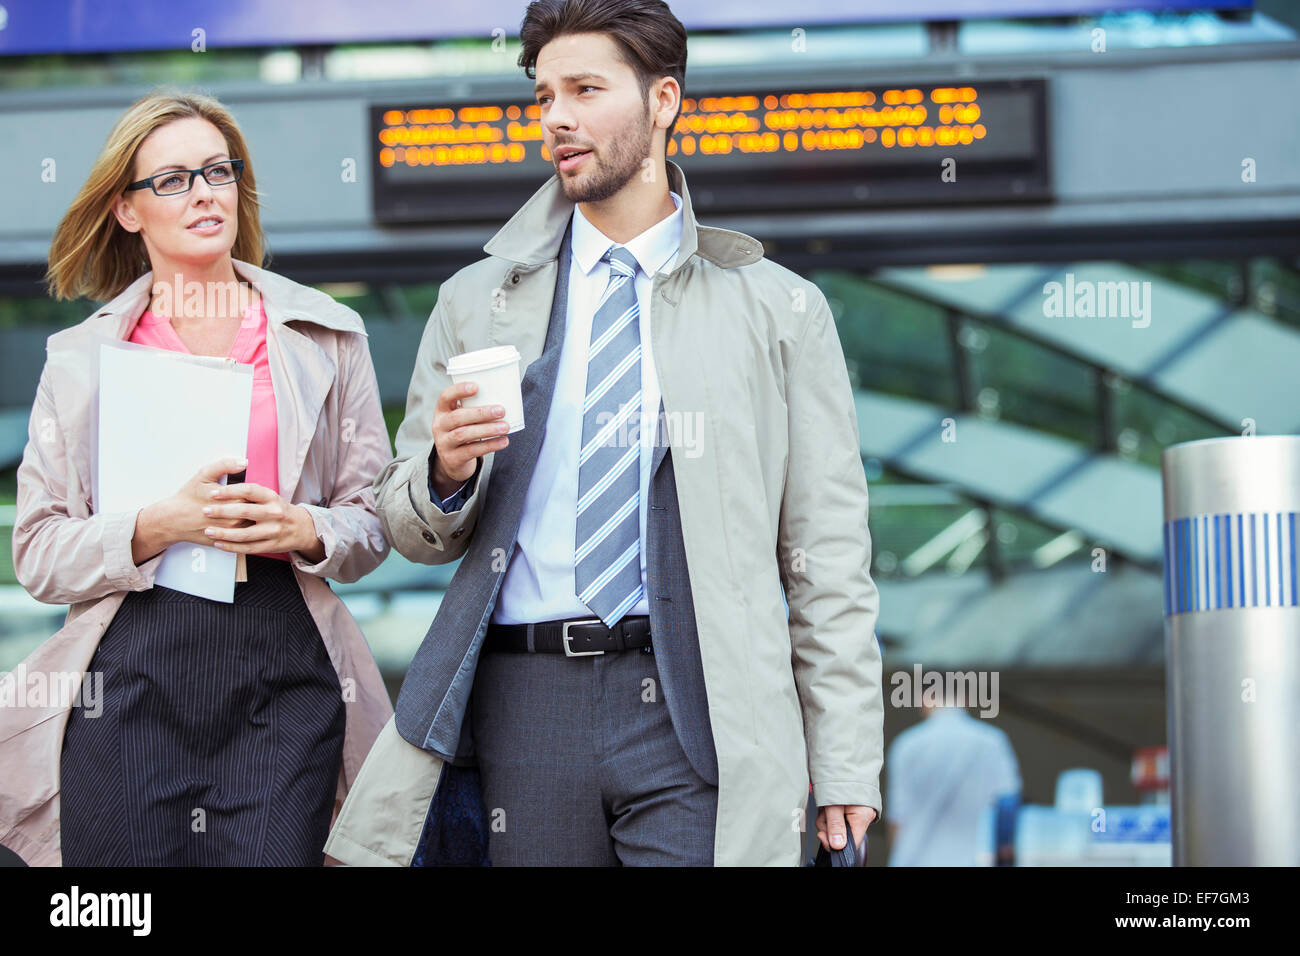 Business people walking and talking in train station Stock Photo